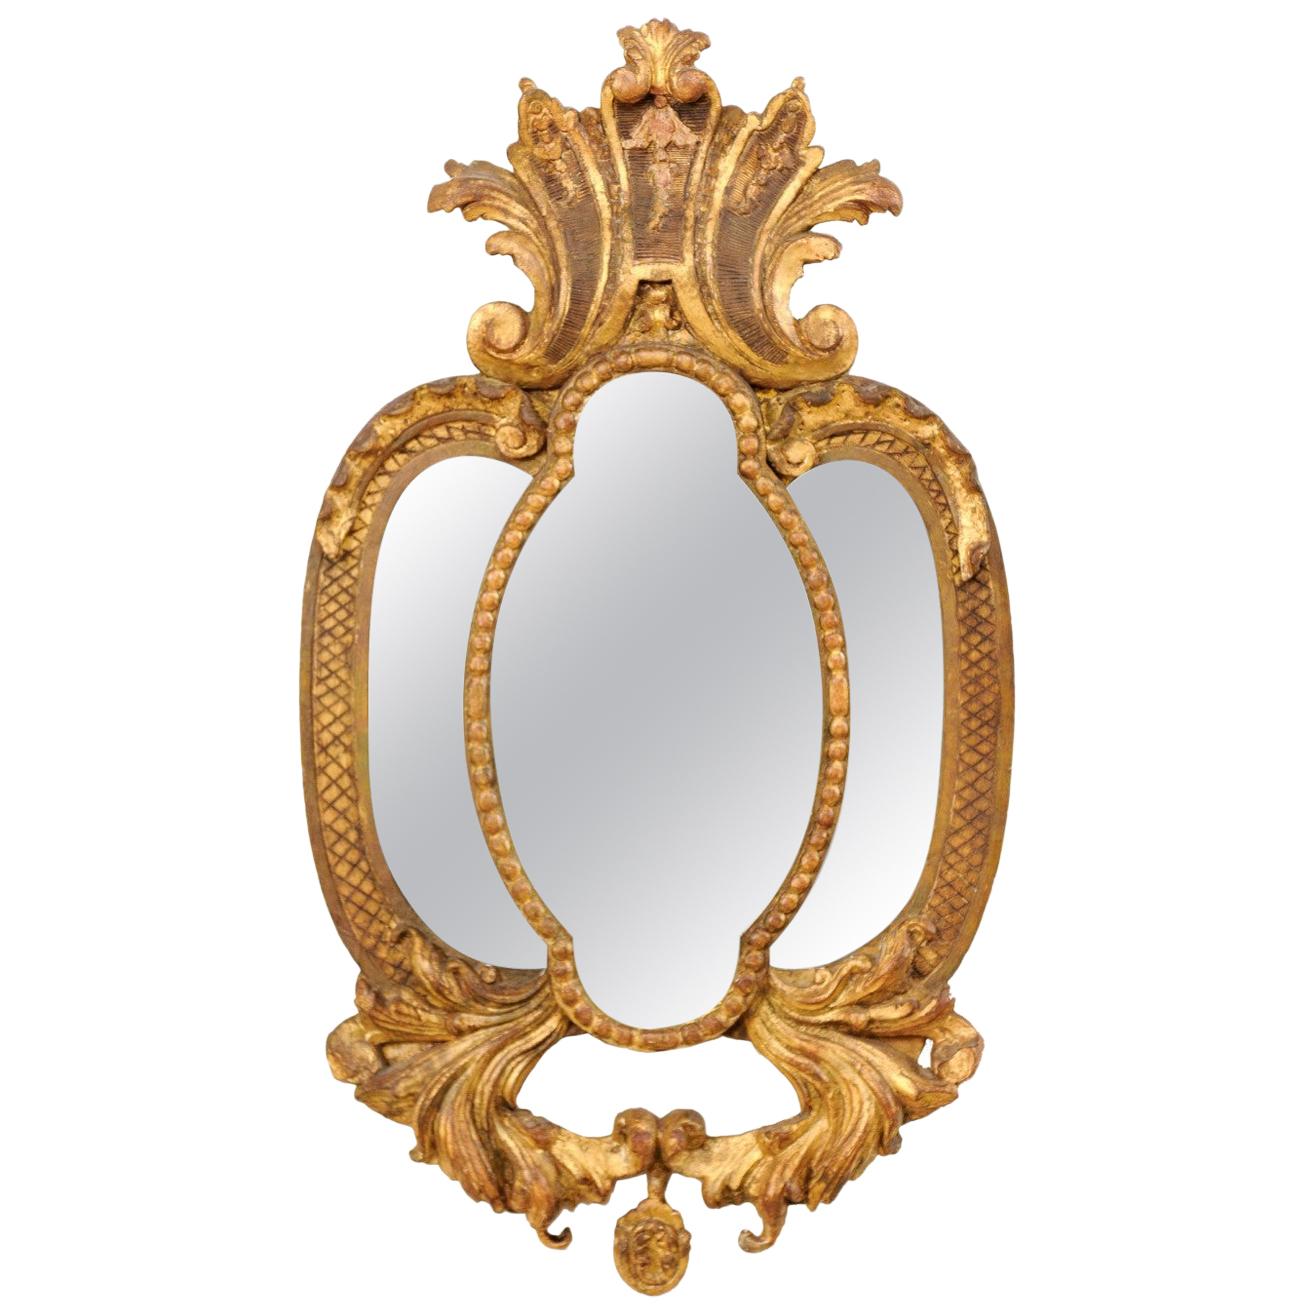 Lovely Carved and Giltwood Mirror with Acanthus Leaf Motif, Mid-20th Century